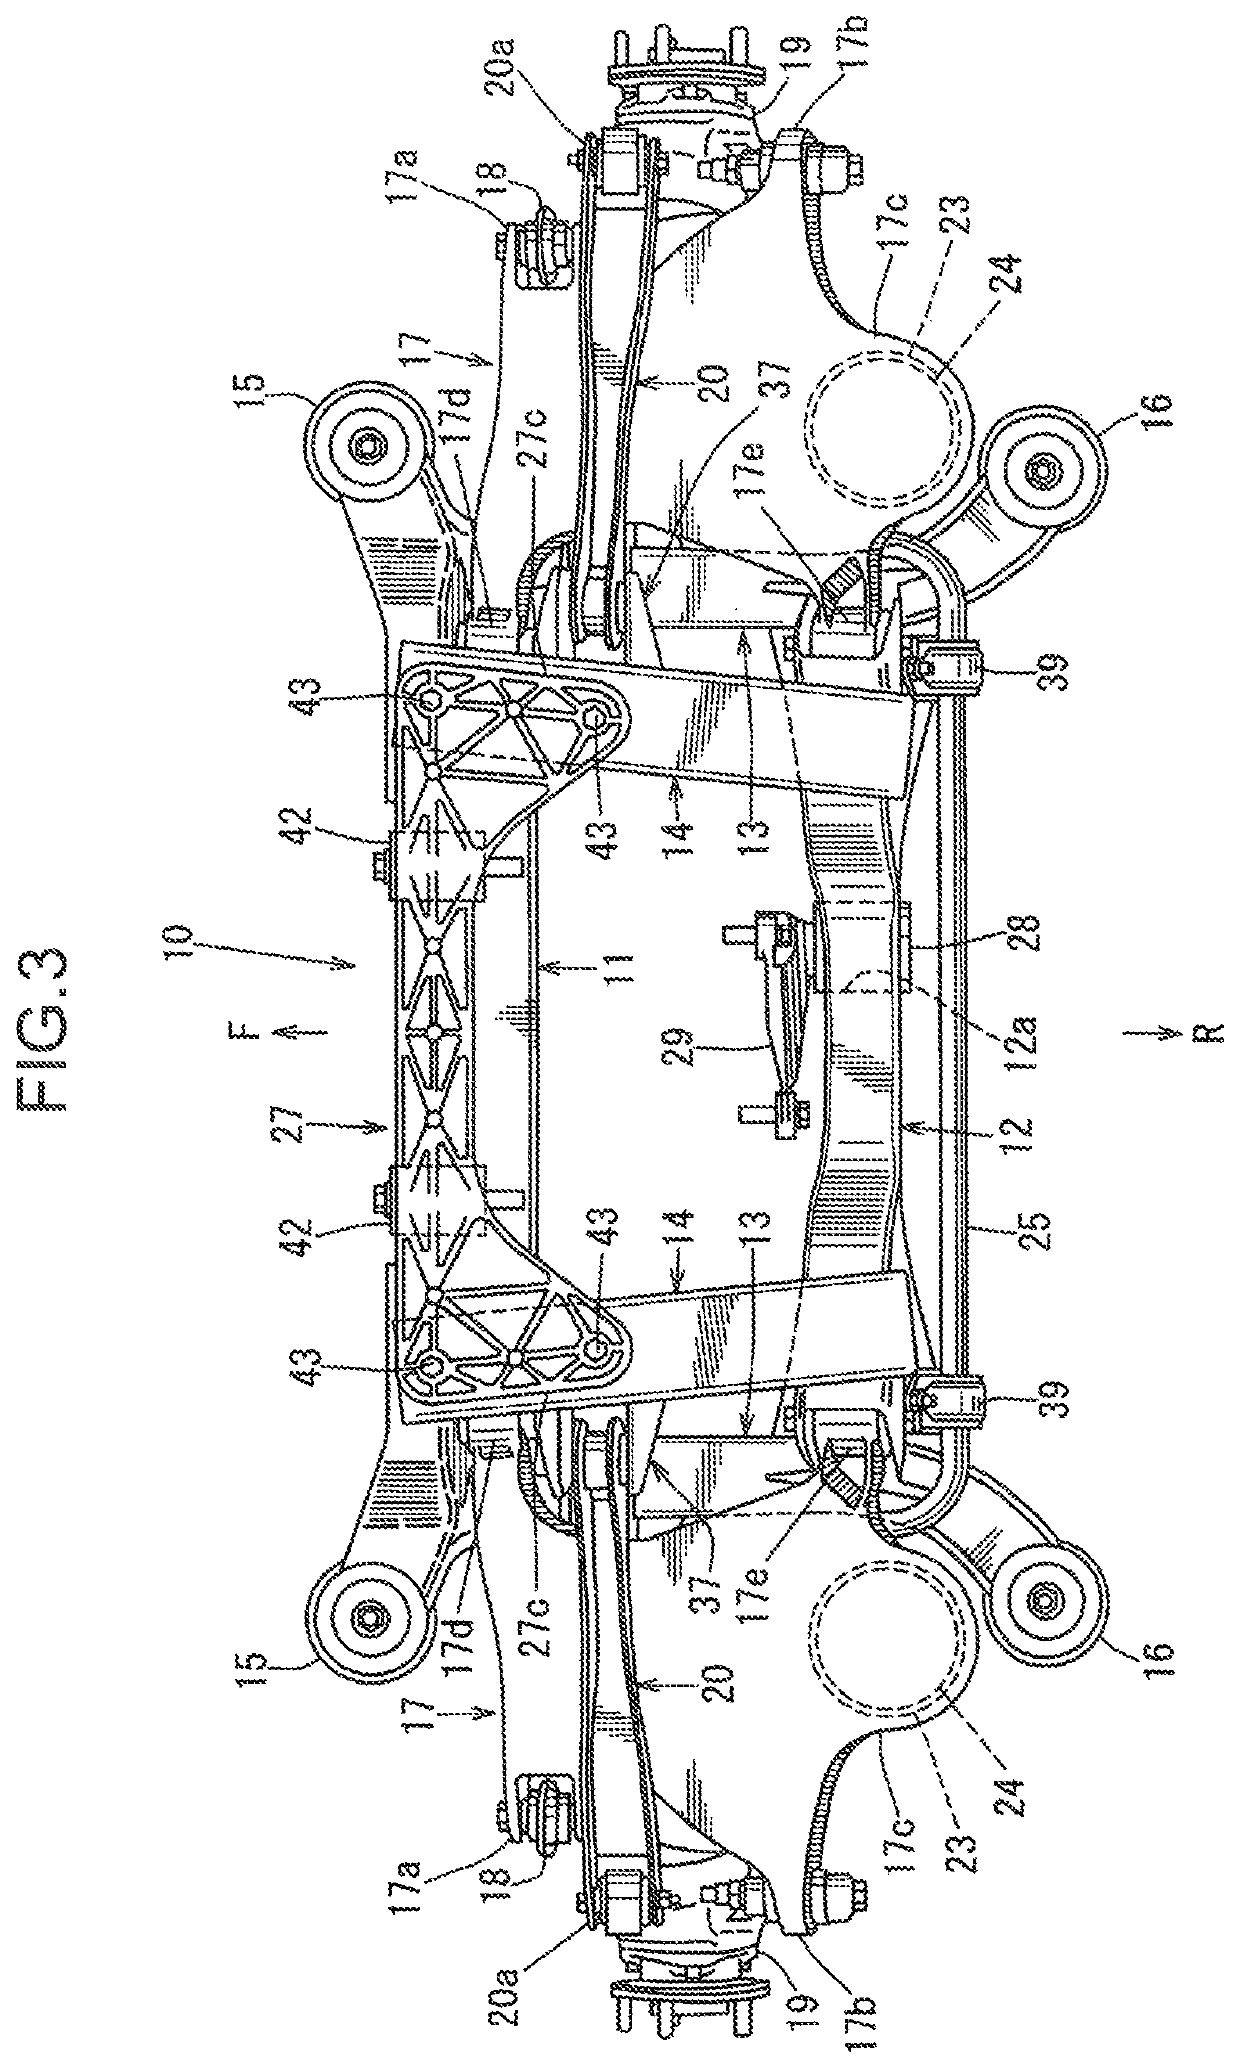 Rear subframe structure